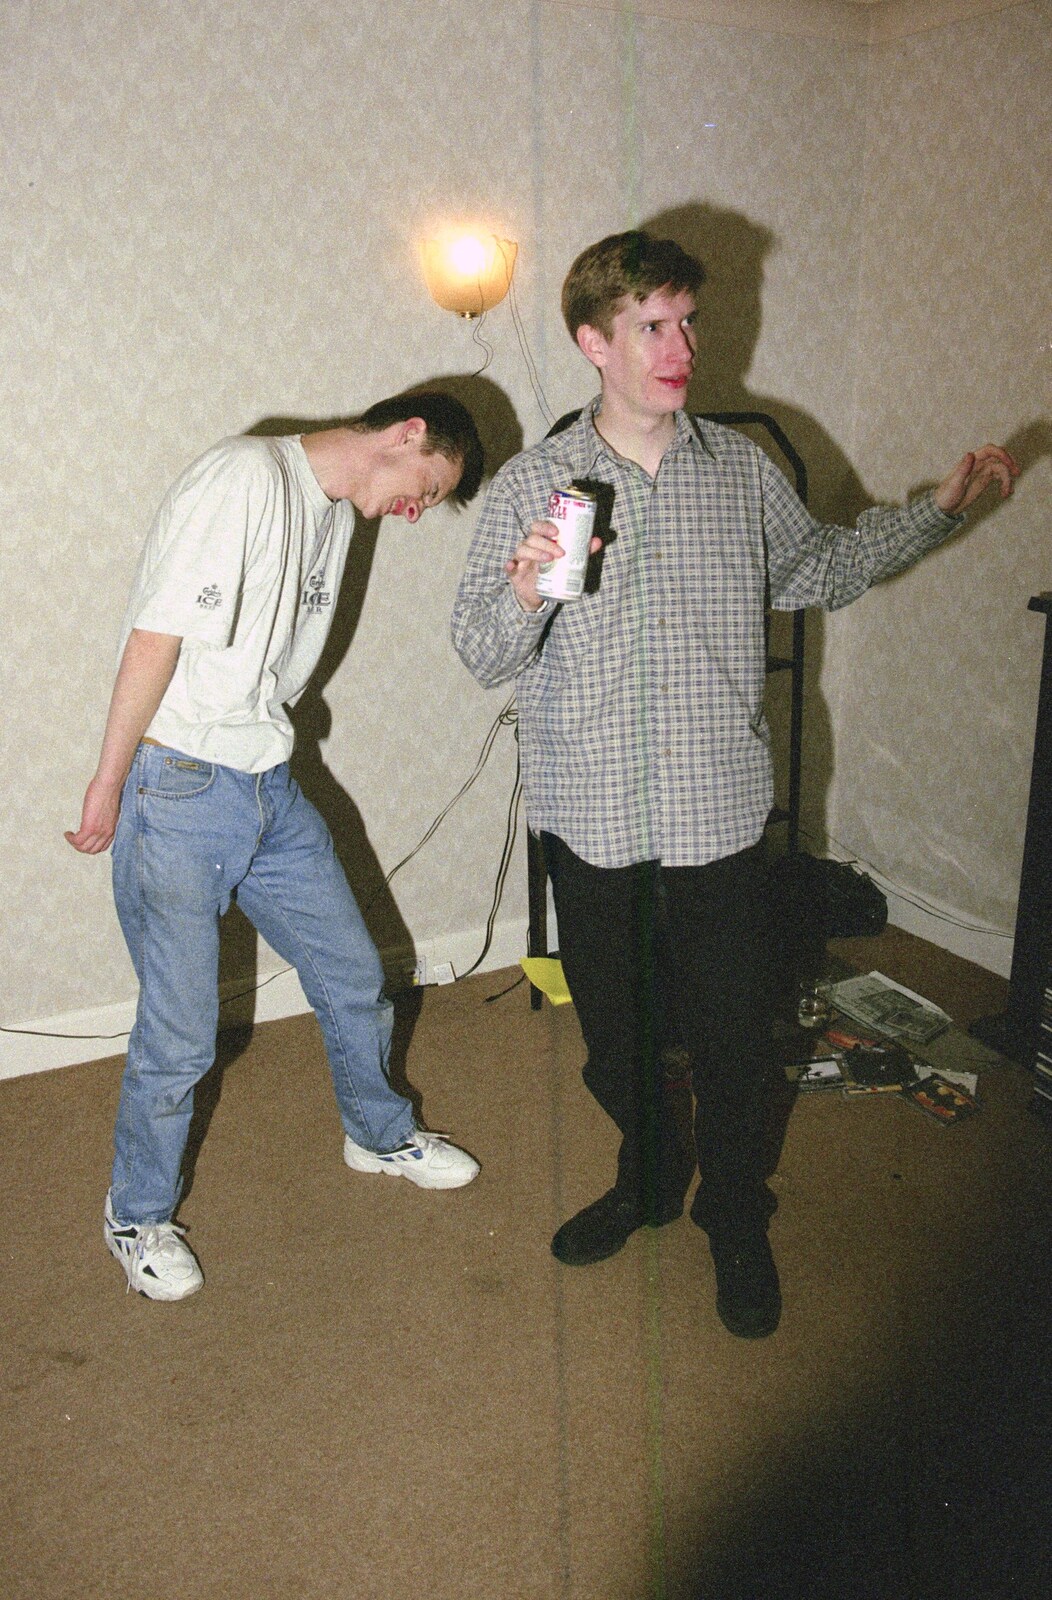 Andrew and Paul bust some moves from Andrew's CISU Party, and Nosher's Garden Barbeque, Ipswich and Brome, Suffolk - June 10th 1998